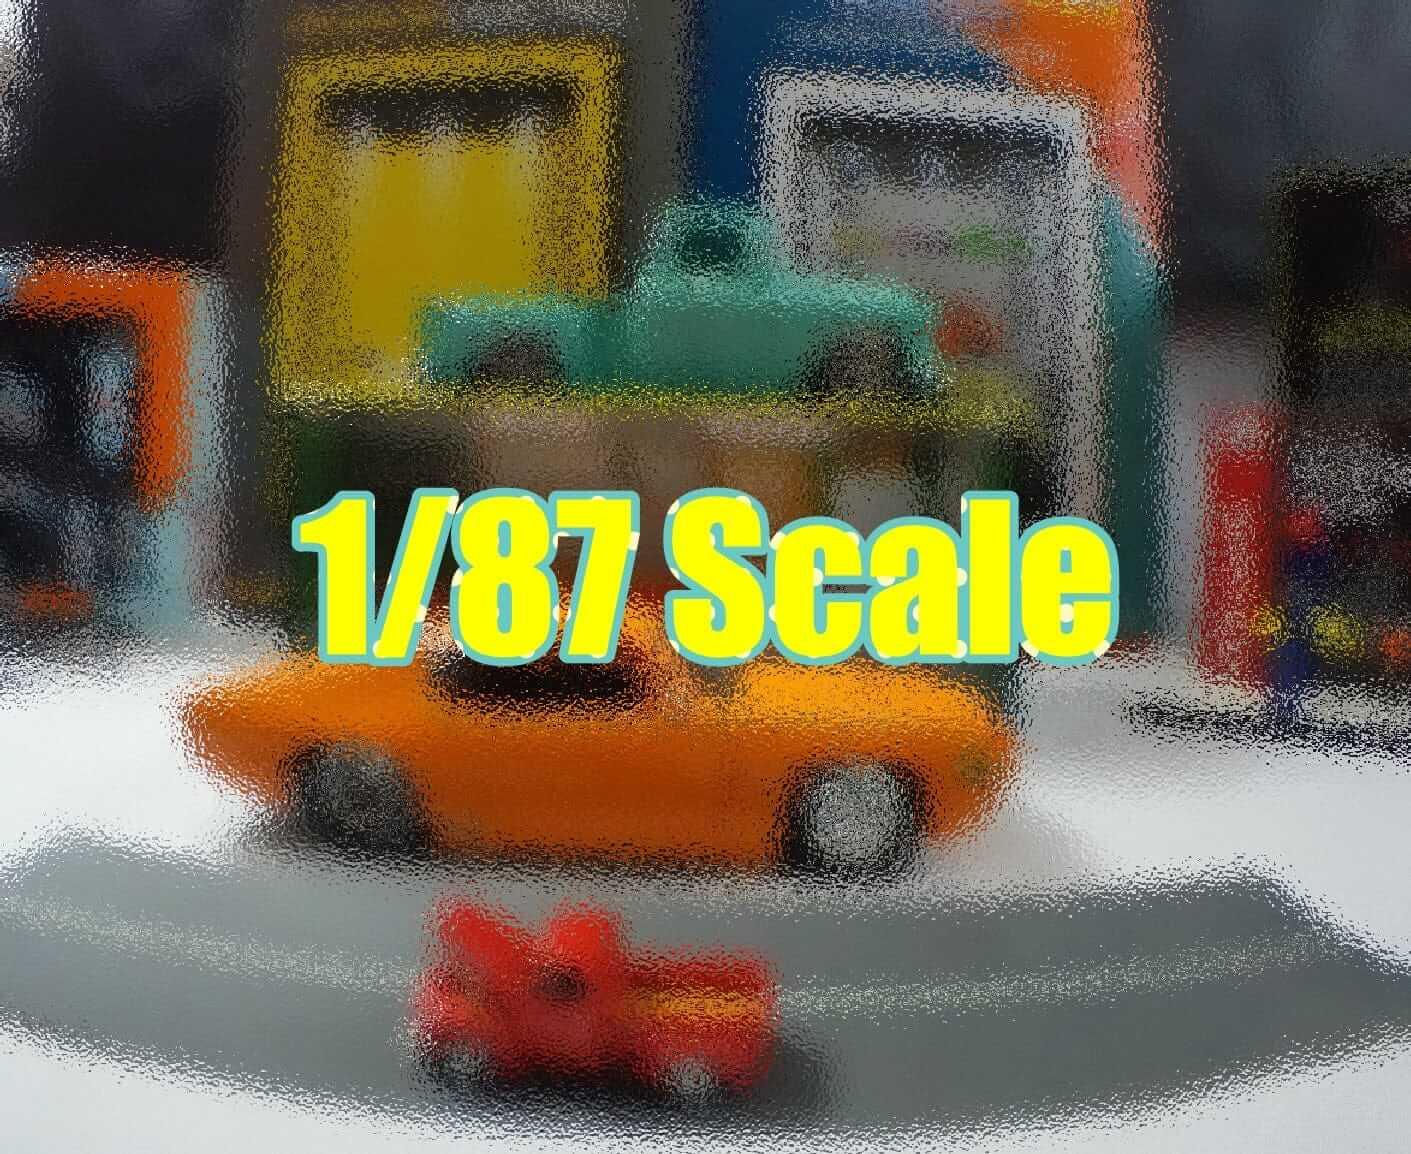 1:87 Scale